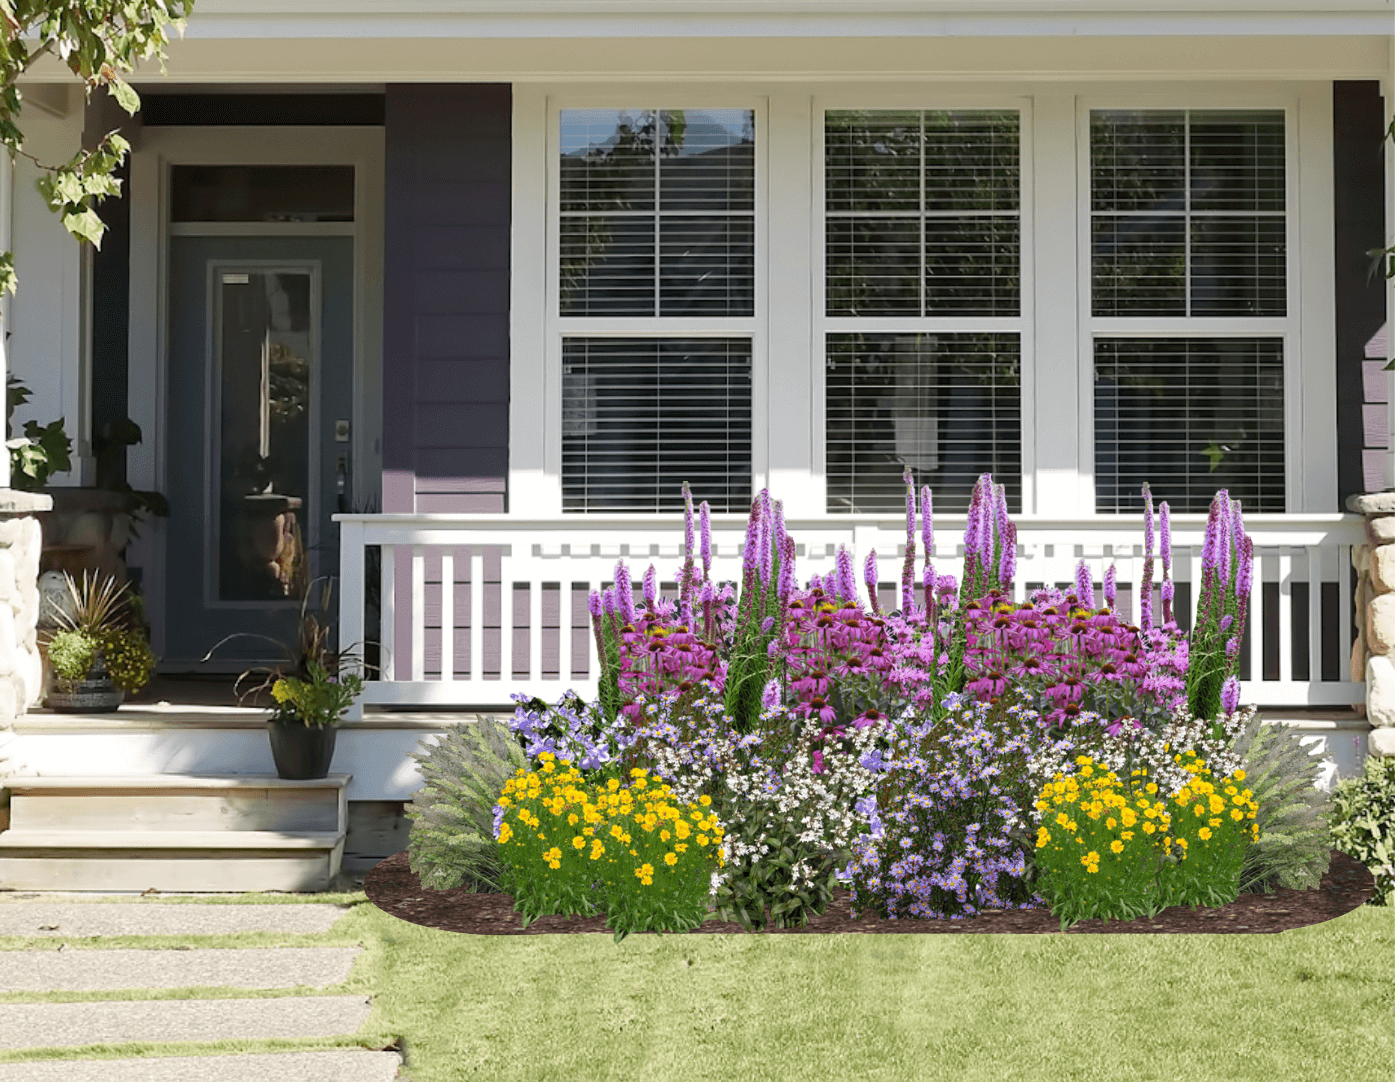 A garden of purple, white and yellow native flowers and grasses in front of a purple house